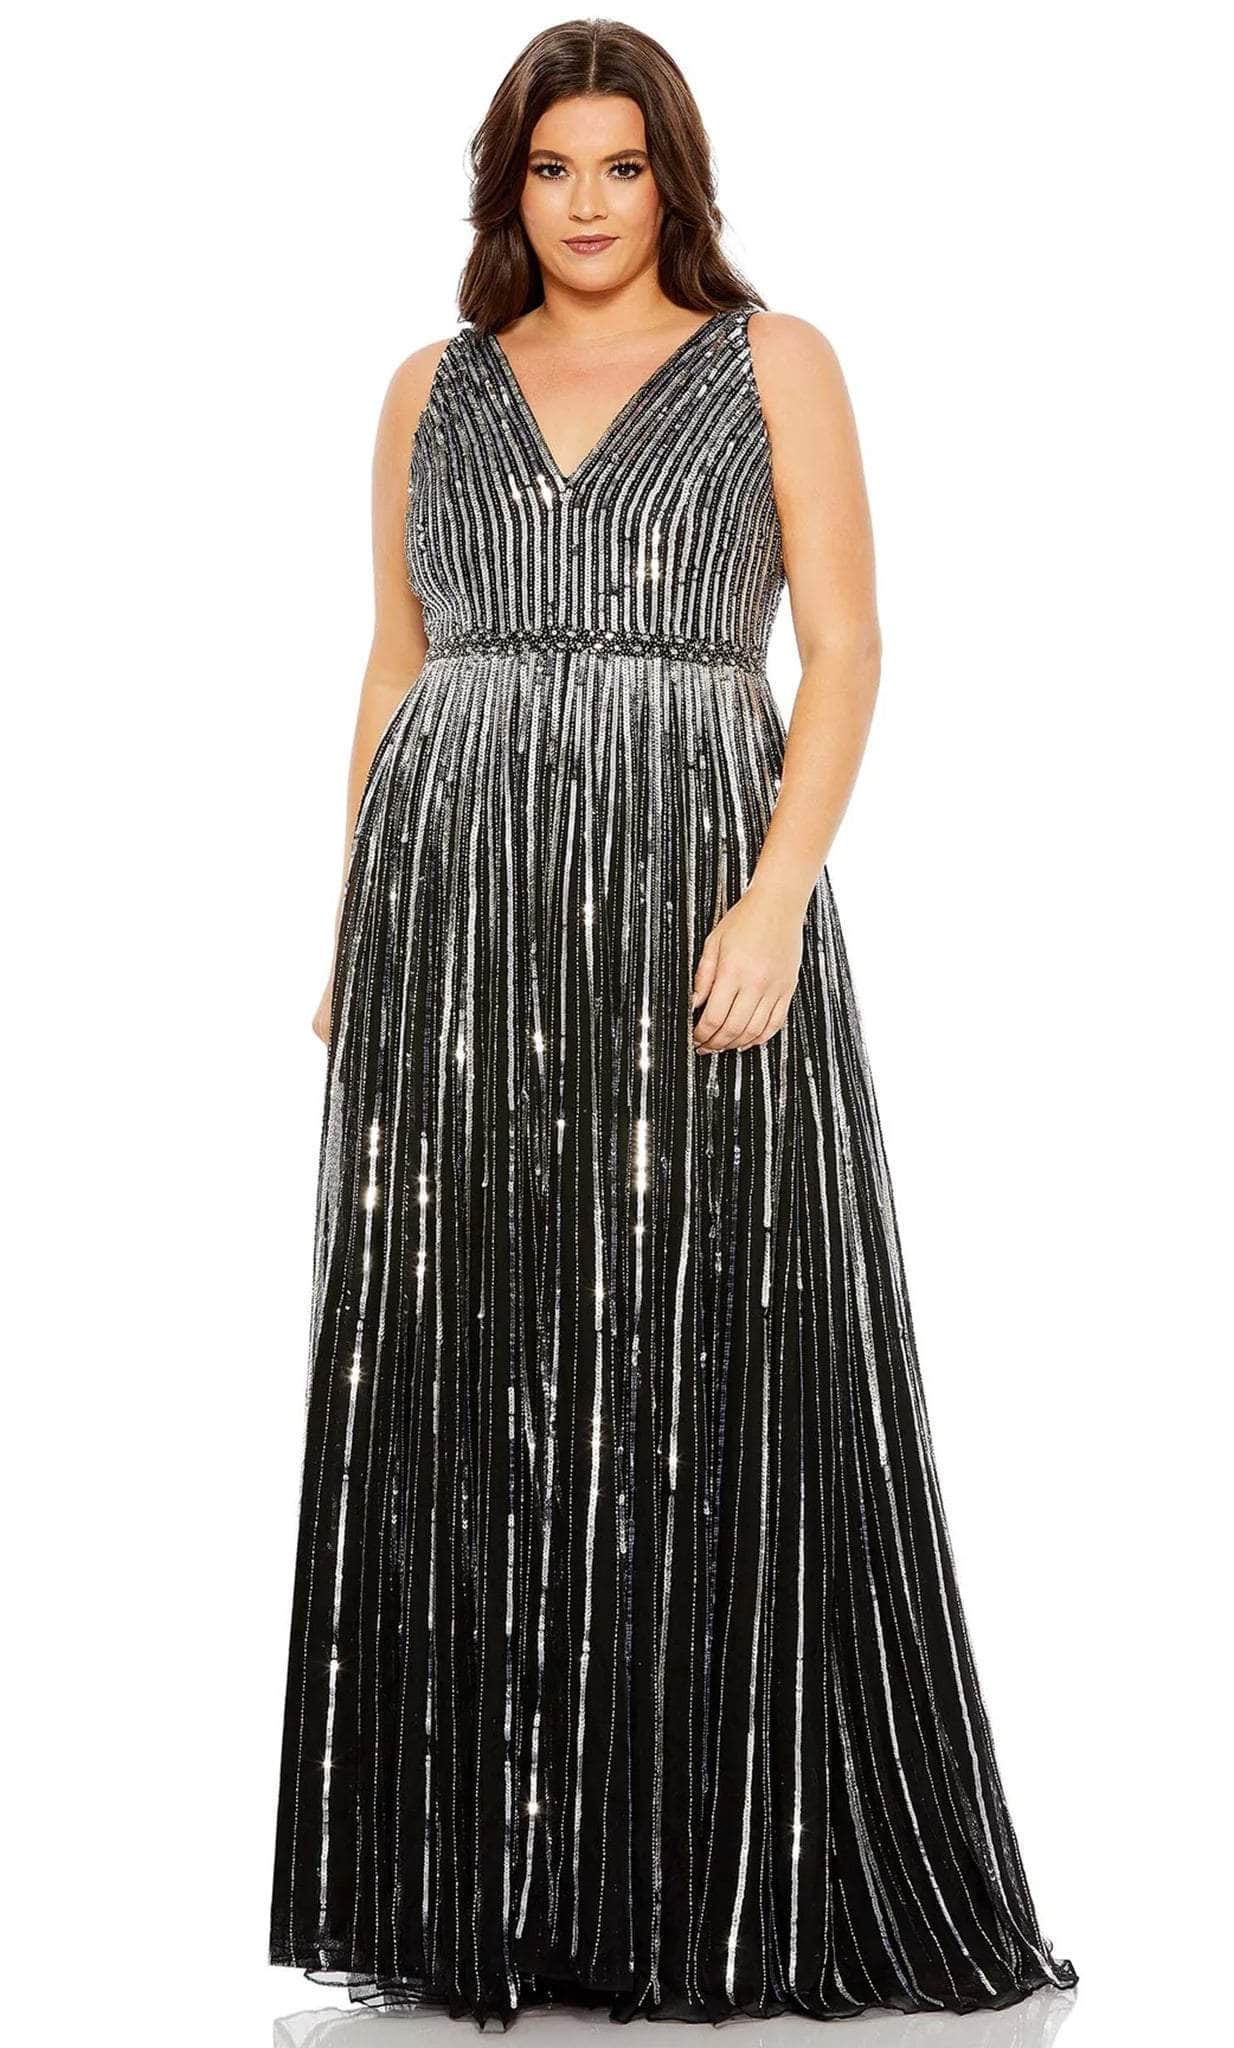 Mac Duggal 5755 - Striped Sequined Evening Dress Military Ball 14W / Black Silver